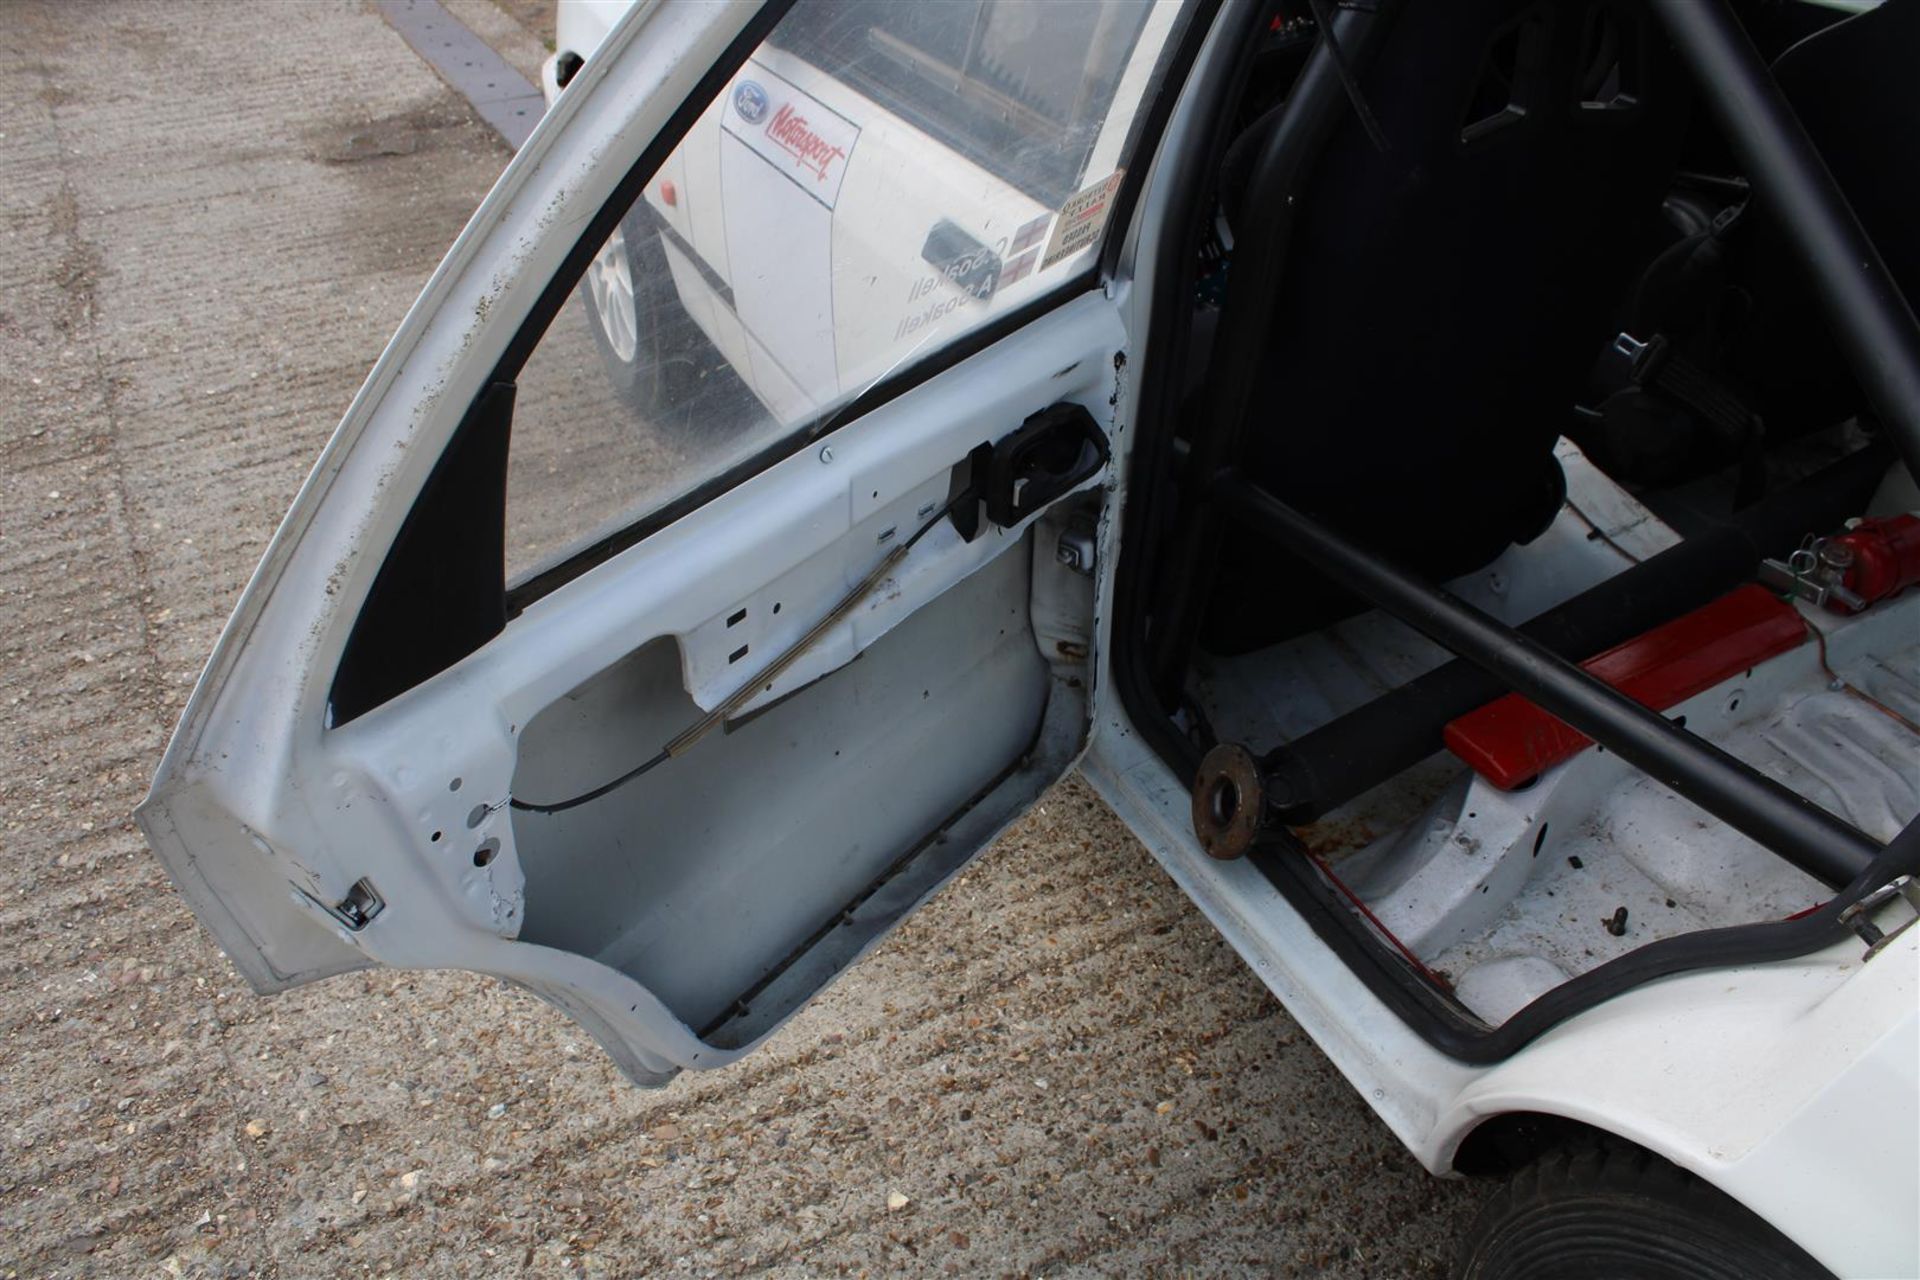 1990 Ford Sierra Sapphire Cosworth (rolling shell) - Image 22 of 35